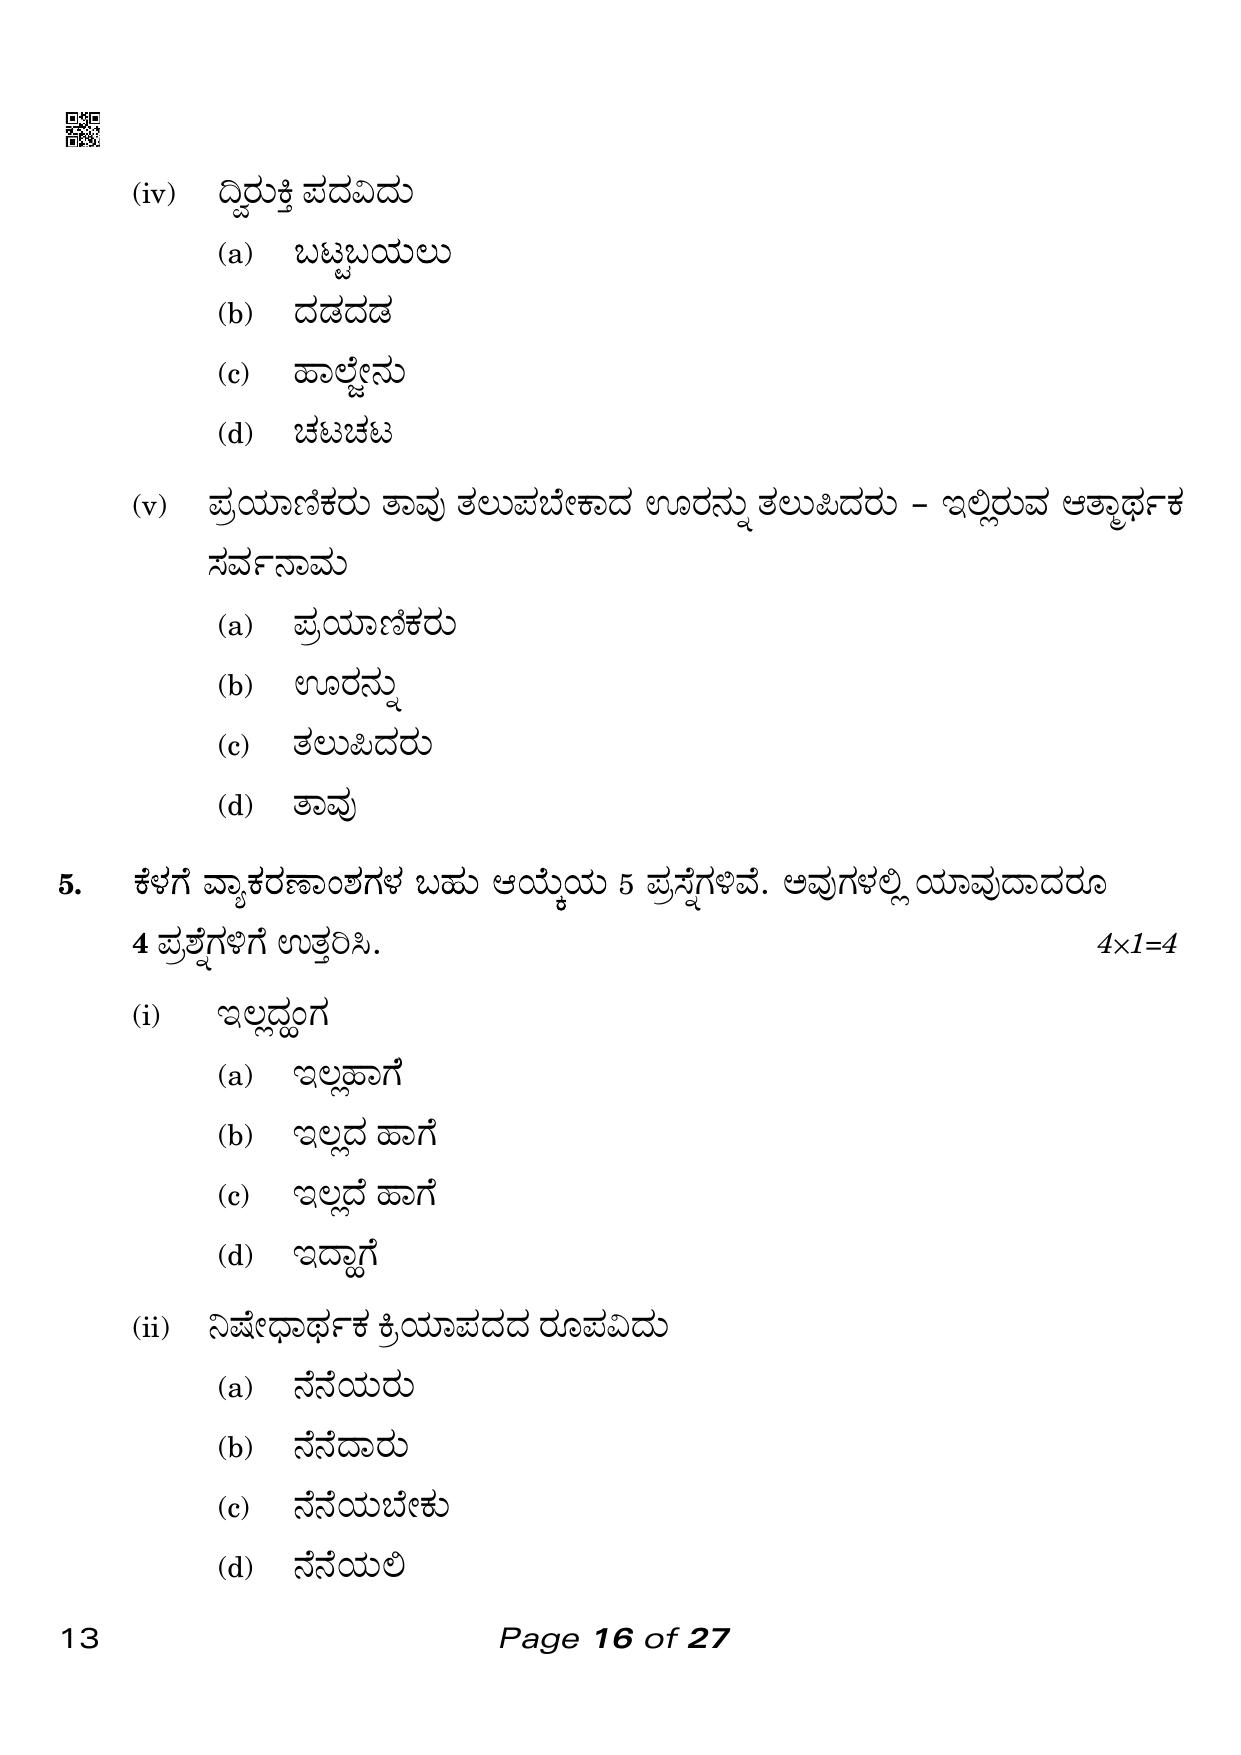 CBSE Class 10 Kannada (Compartment) 2023 Question Paper - Page 16